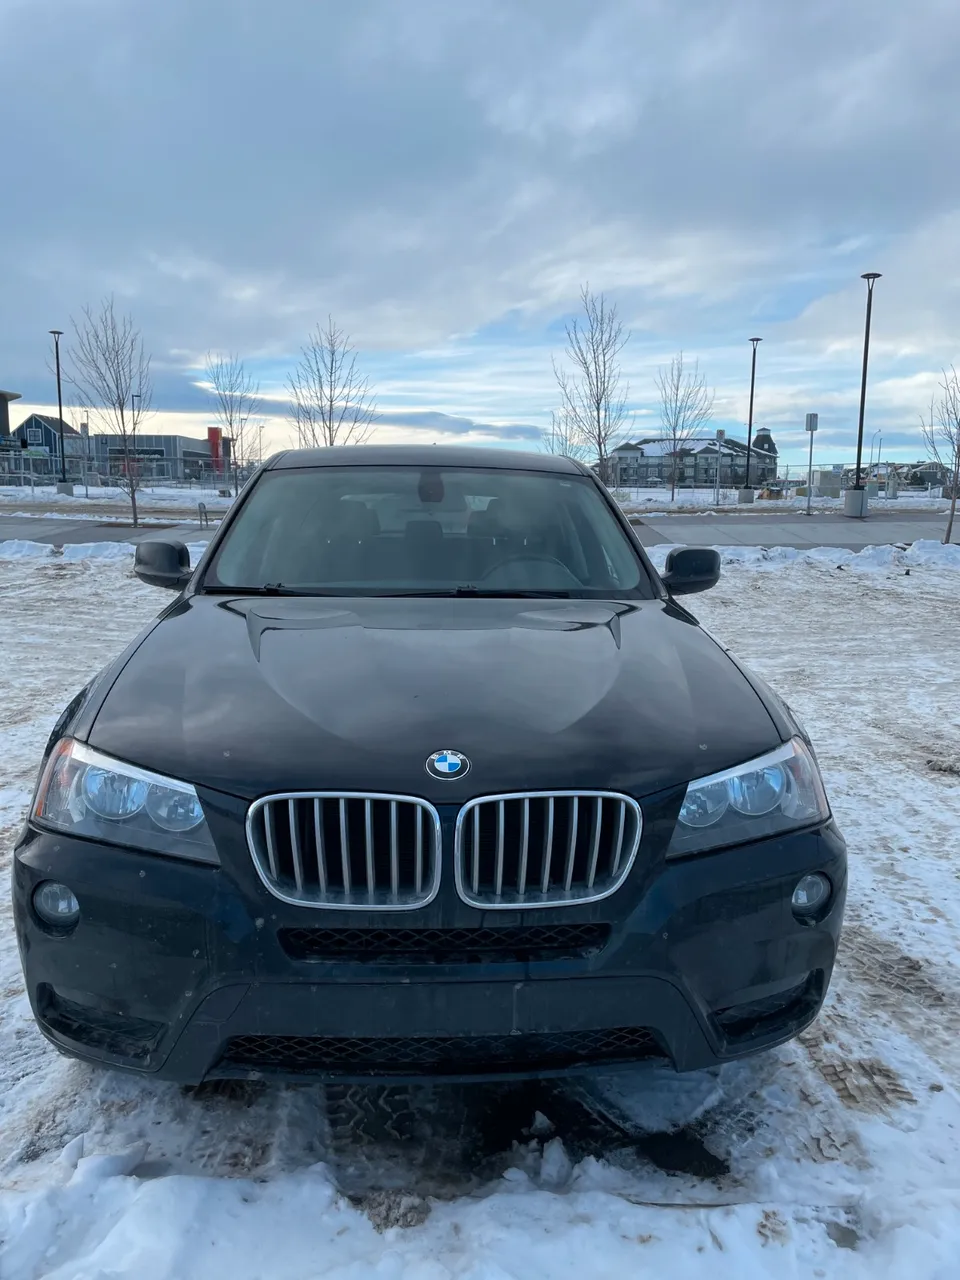 2011 BMW X3 - Includes all-season and WINTER tires